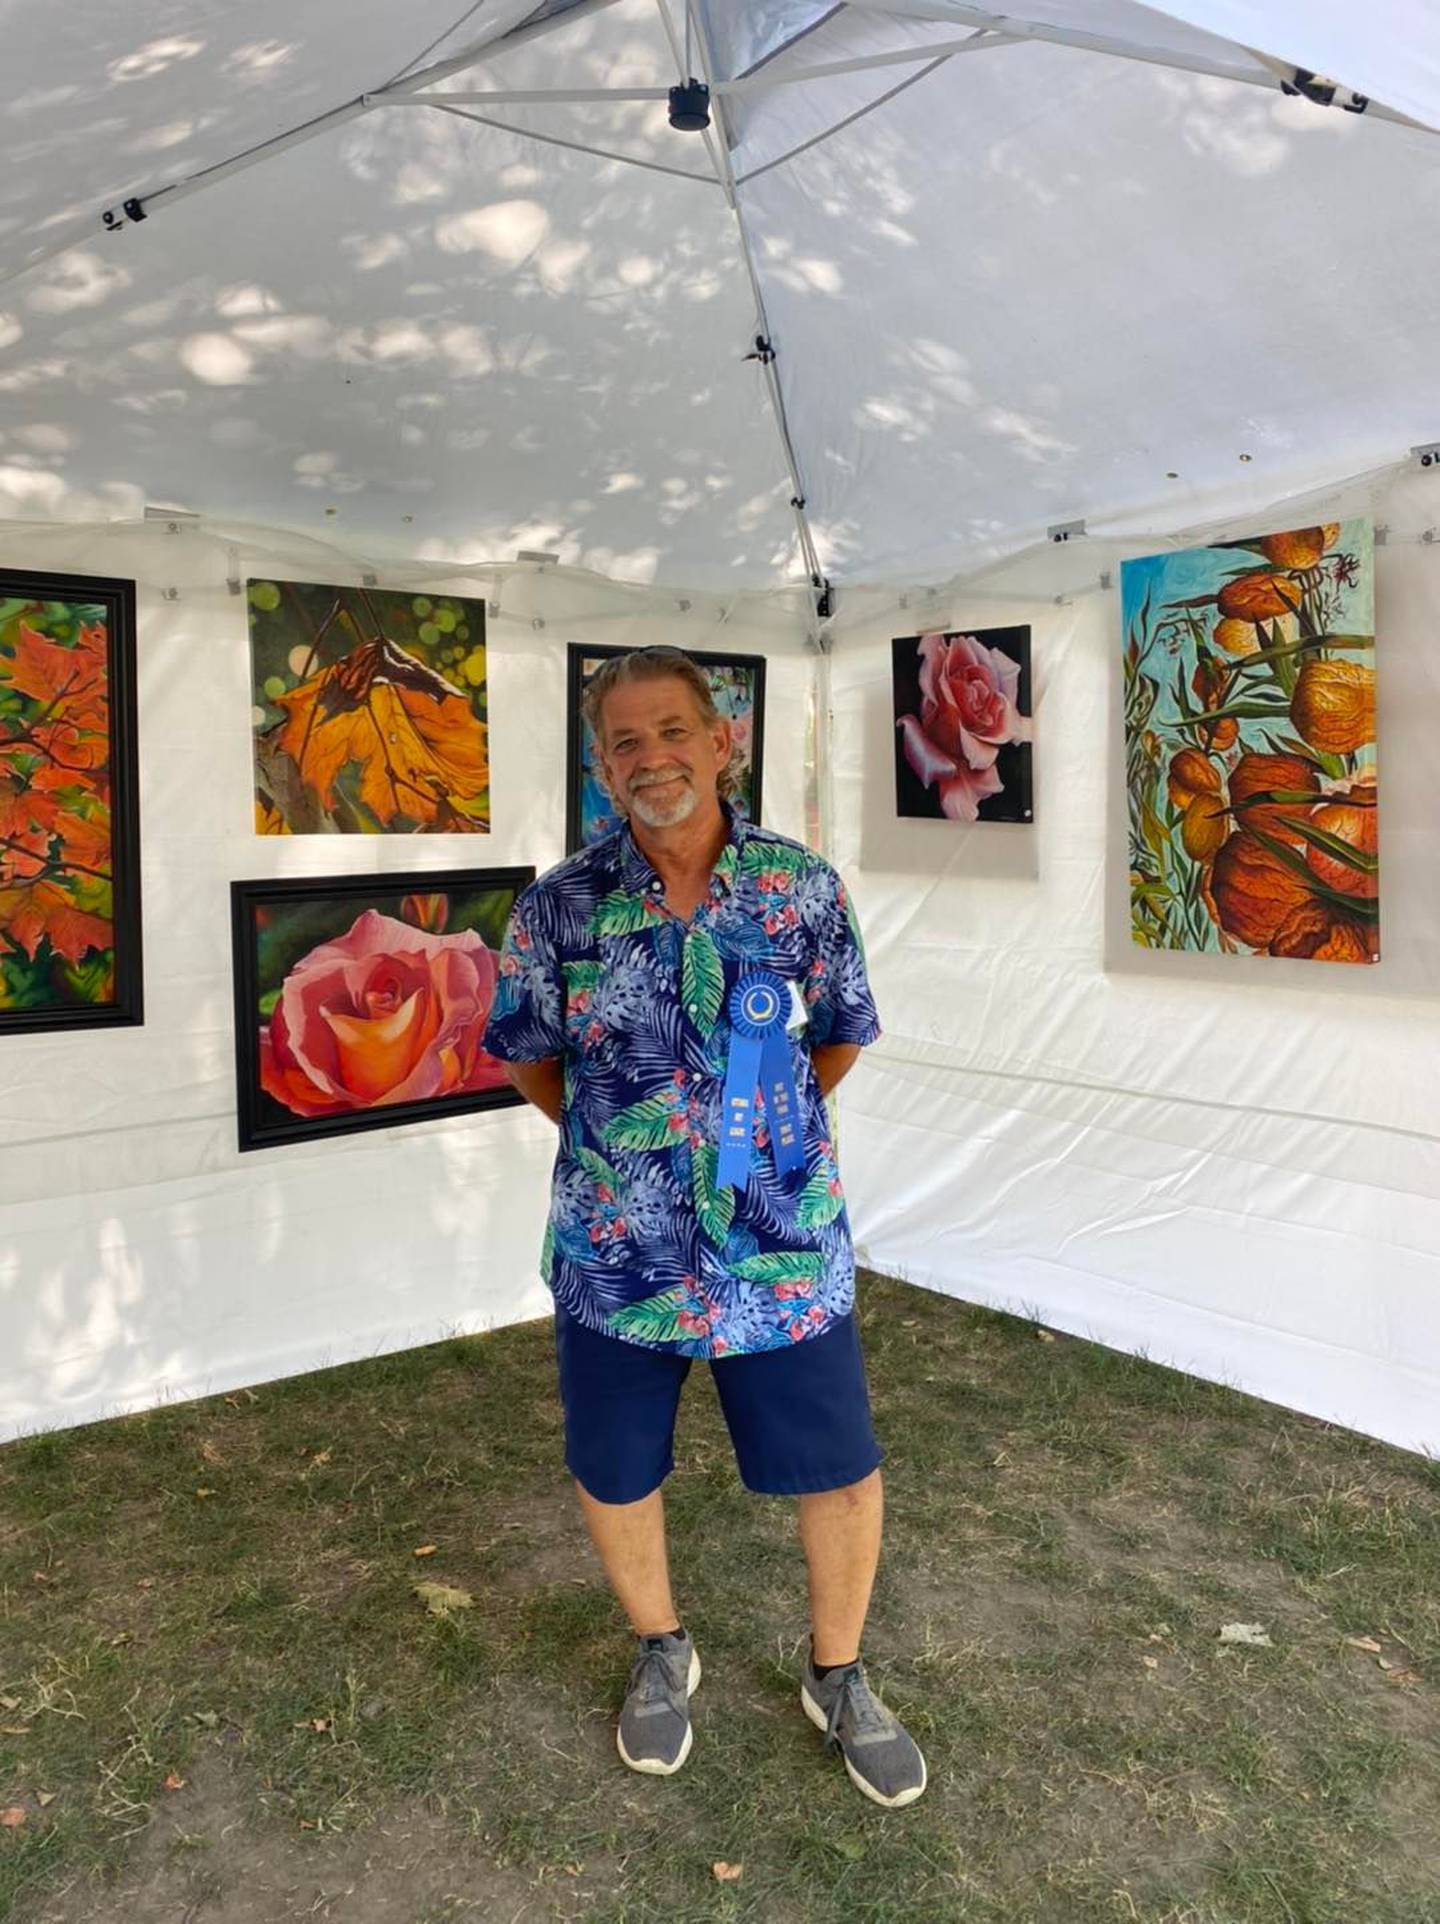 Jeff Walter received second place honors at the 2022 Art in the Park show at Washington Square in Ottawa.